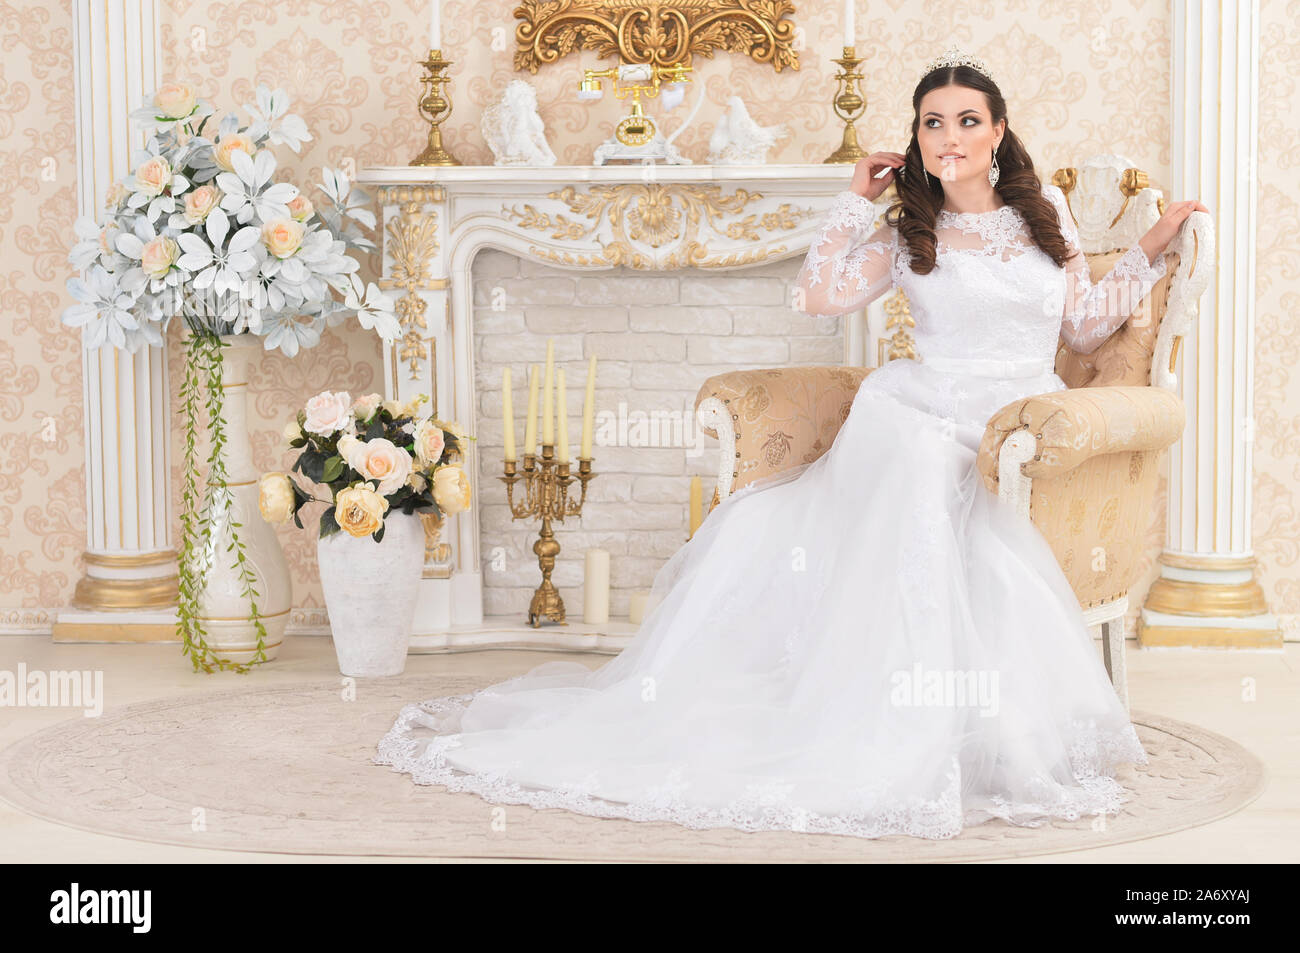 Portrait of young woman in white dress posing in modern interior Banque D'Images